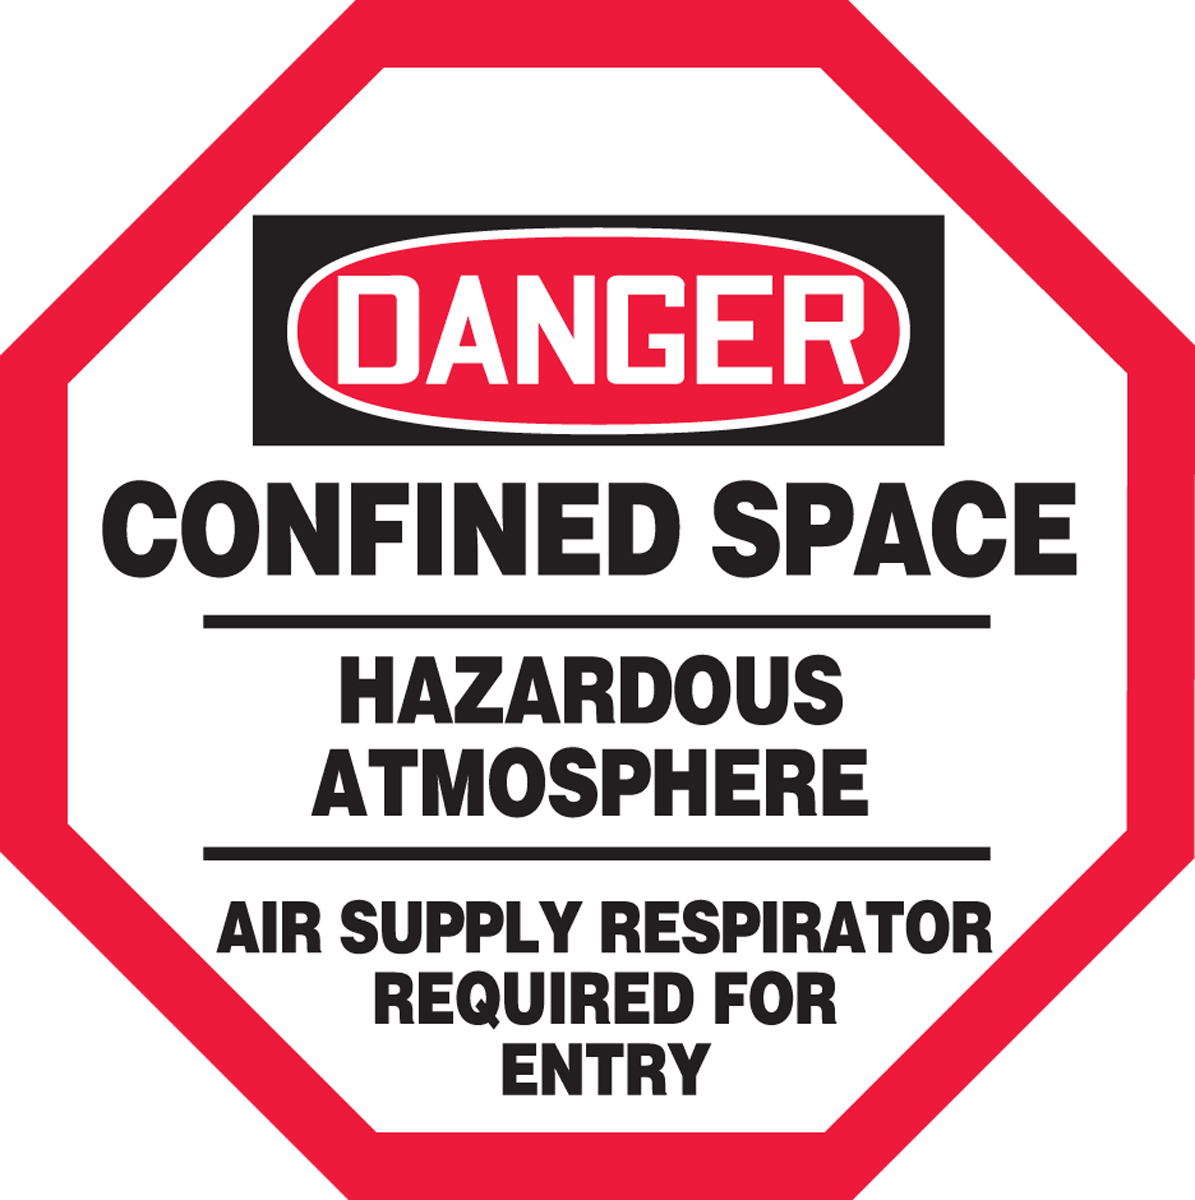 DANGER CONFINED SPACE HAZARDOUS ATMOSPHERE AIR SUPPLY RESPIRATOR REQUIRED FOR ENTRY